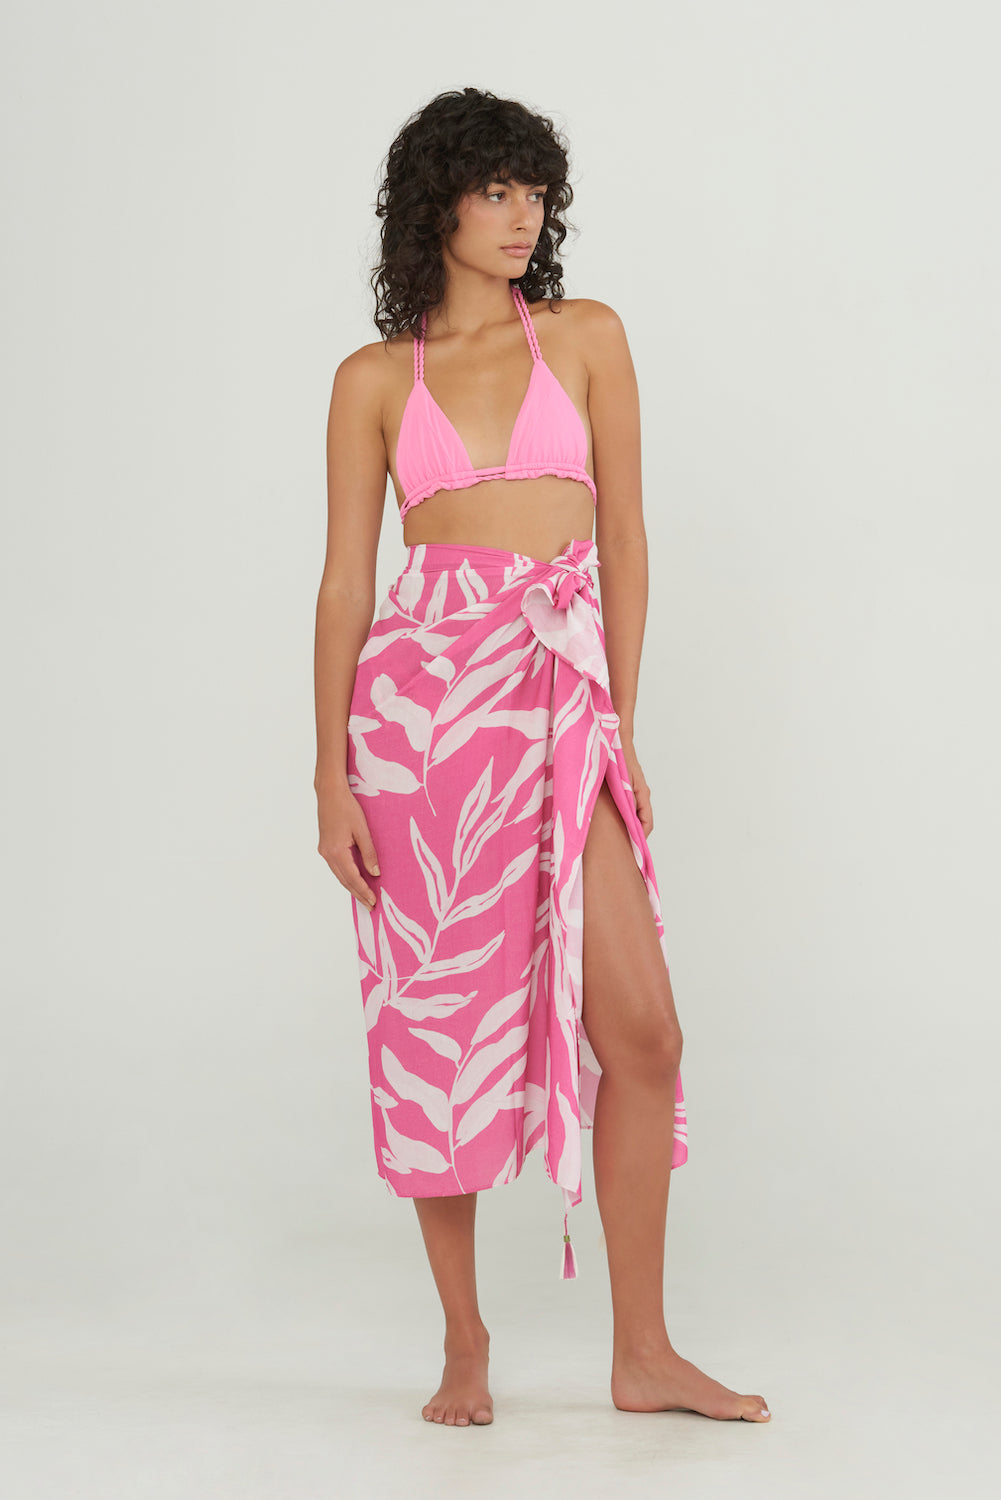 bright pink with white leaves printed sarong 